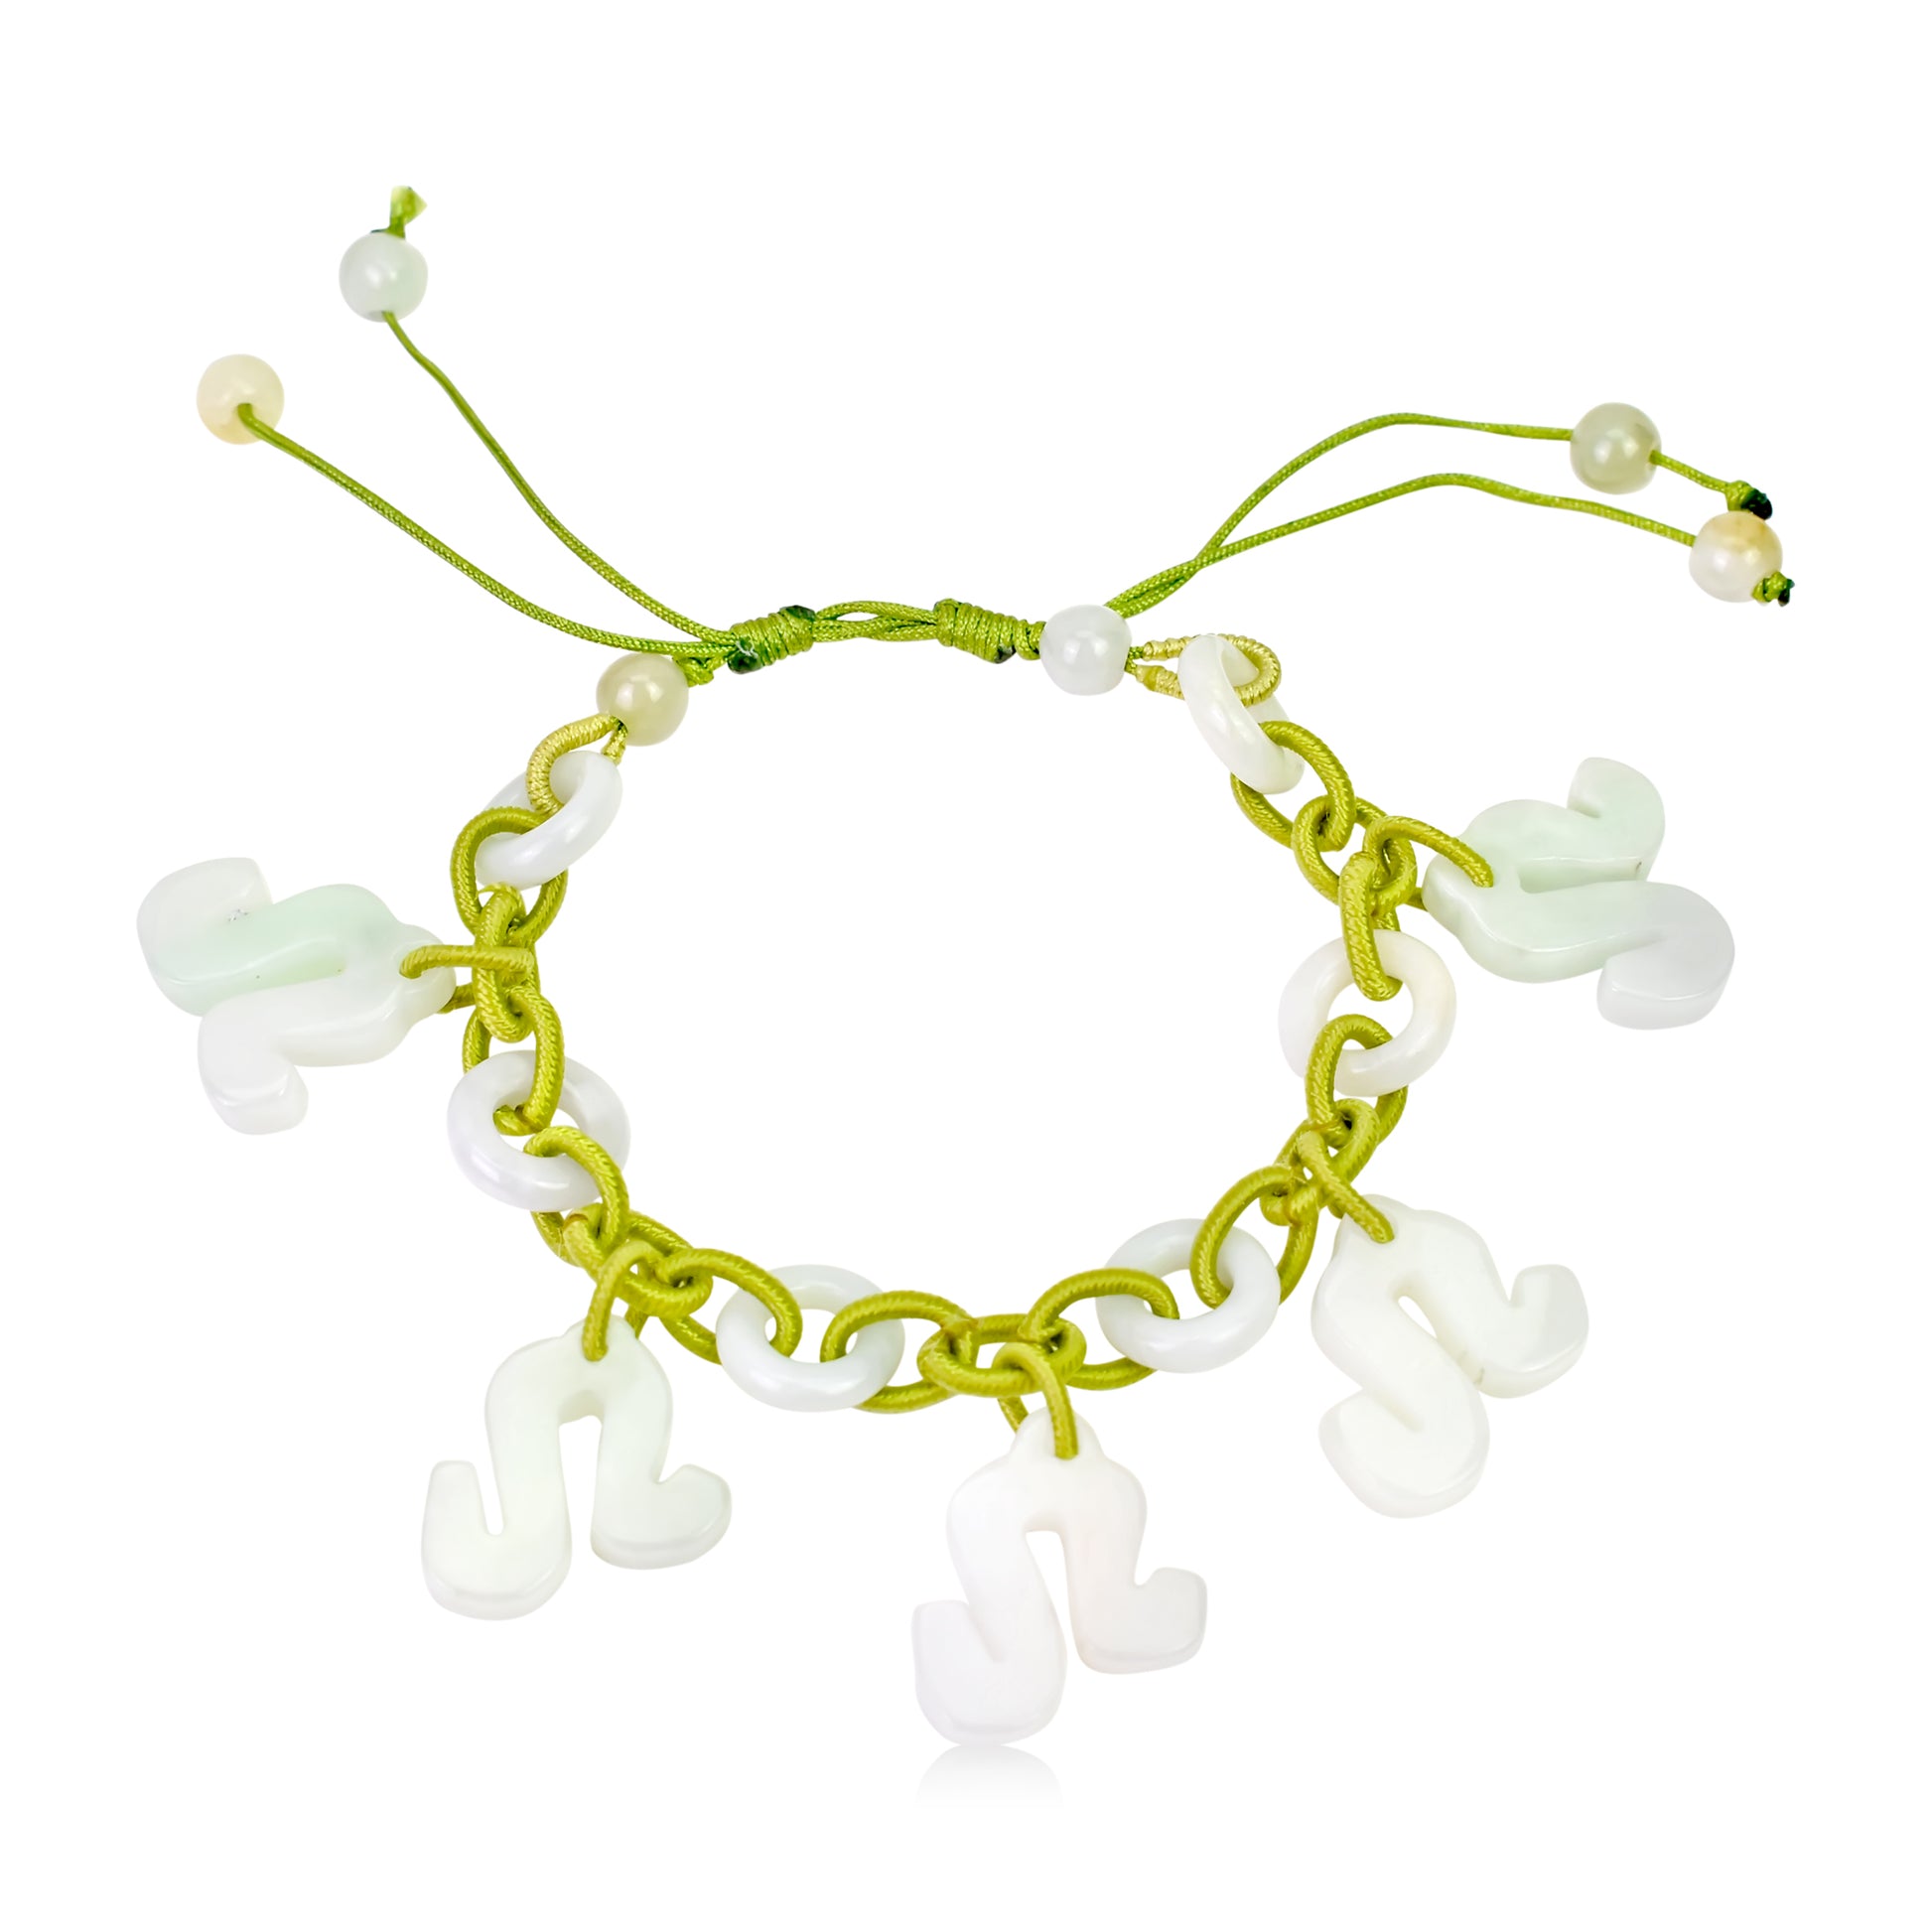 Wear the Force of the Lion on Your Wrist with Our Leo Jade Bracelet made with Lime Cord